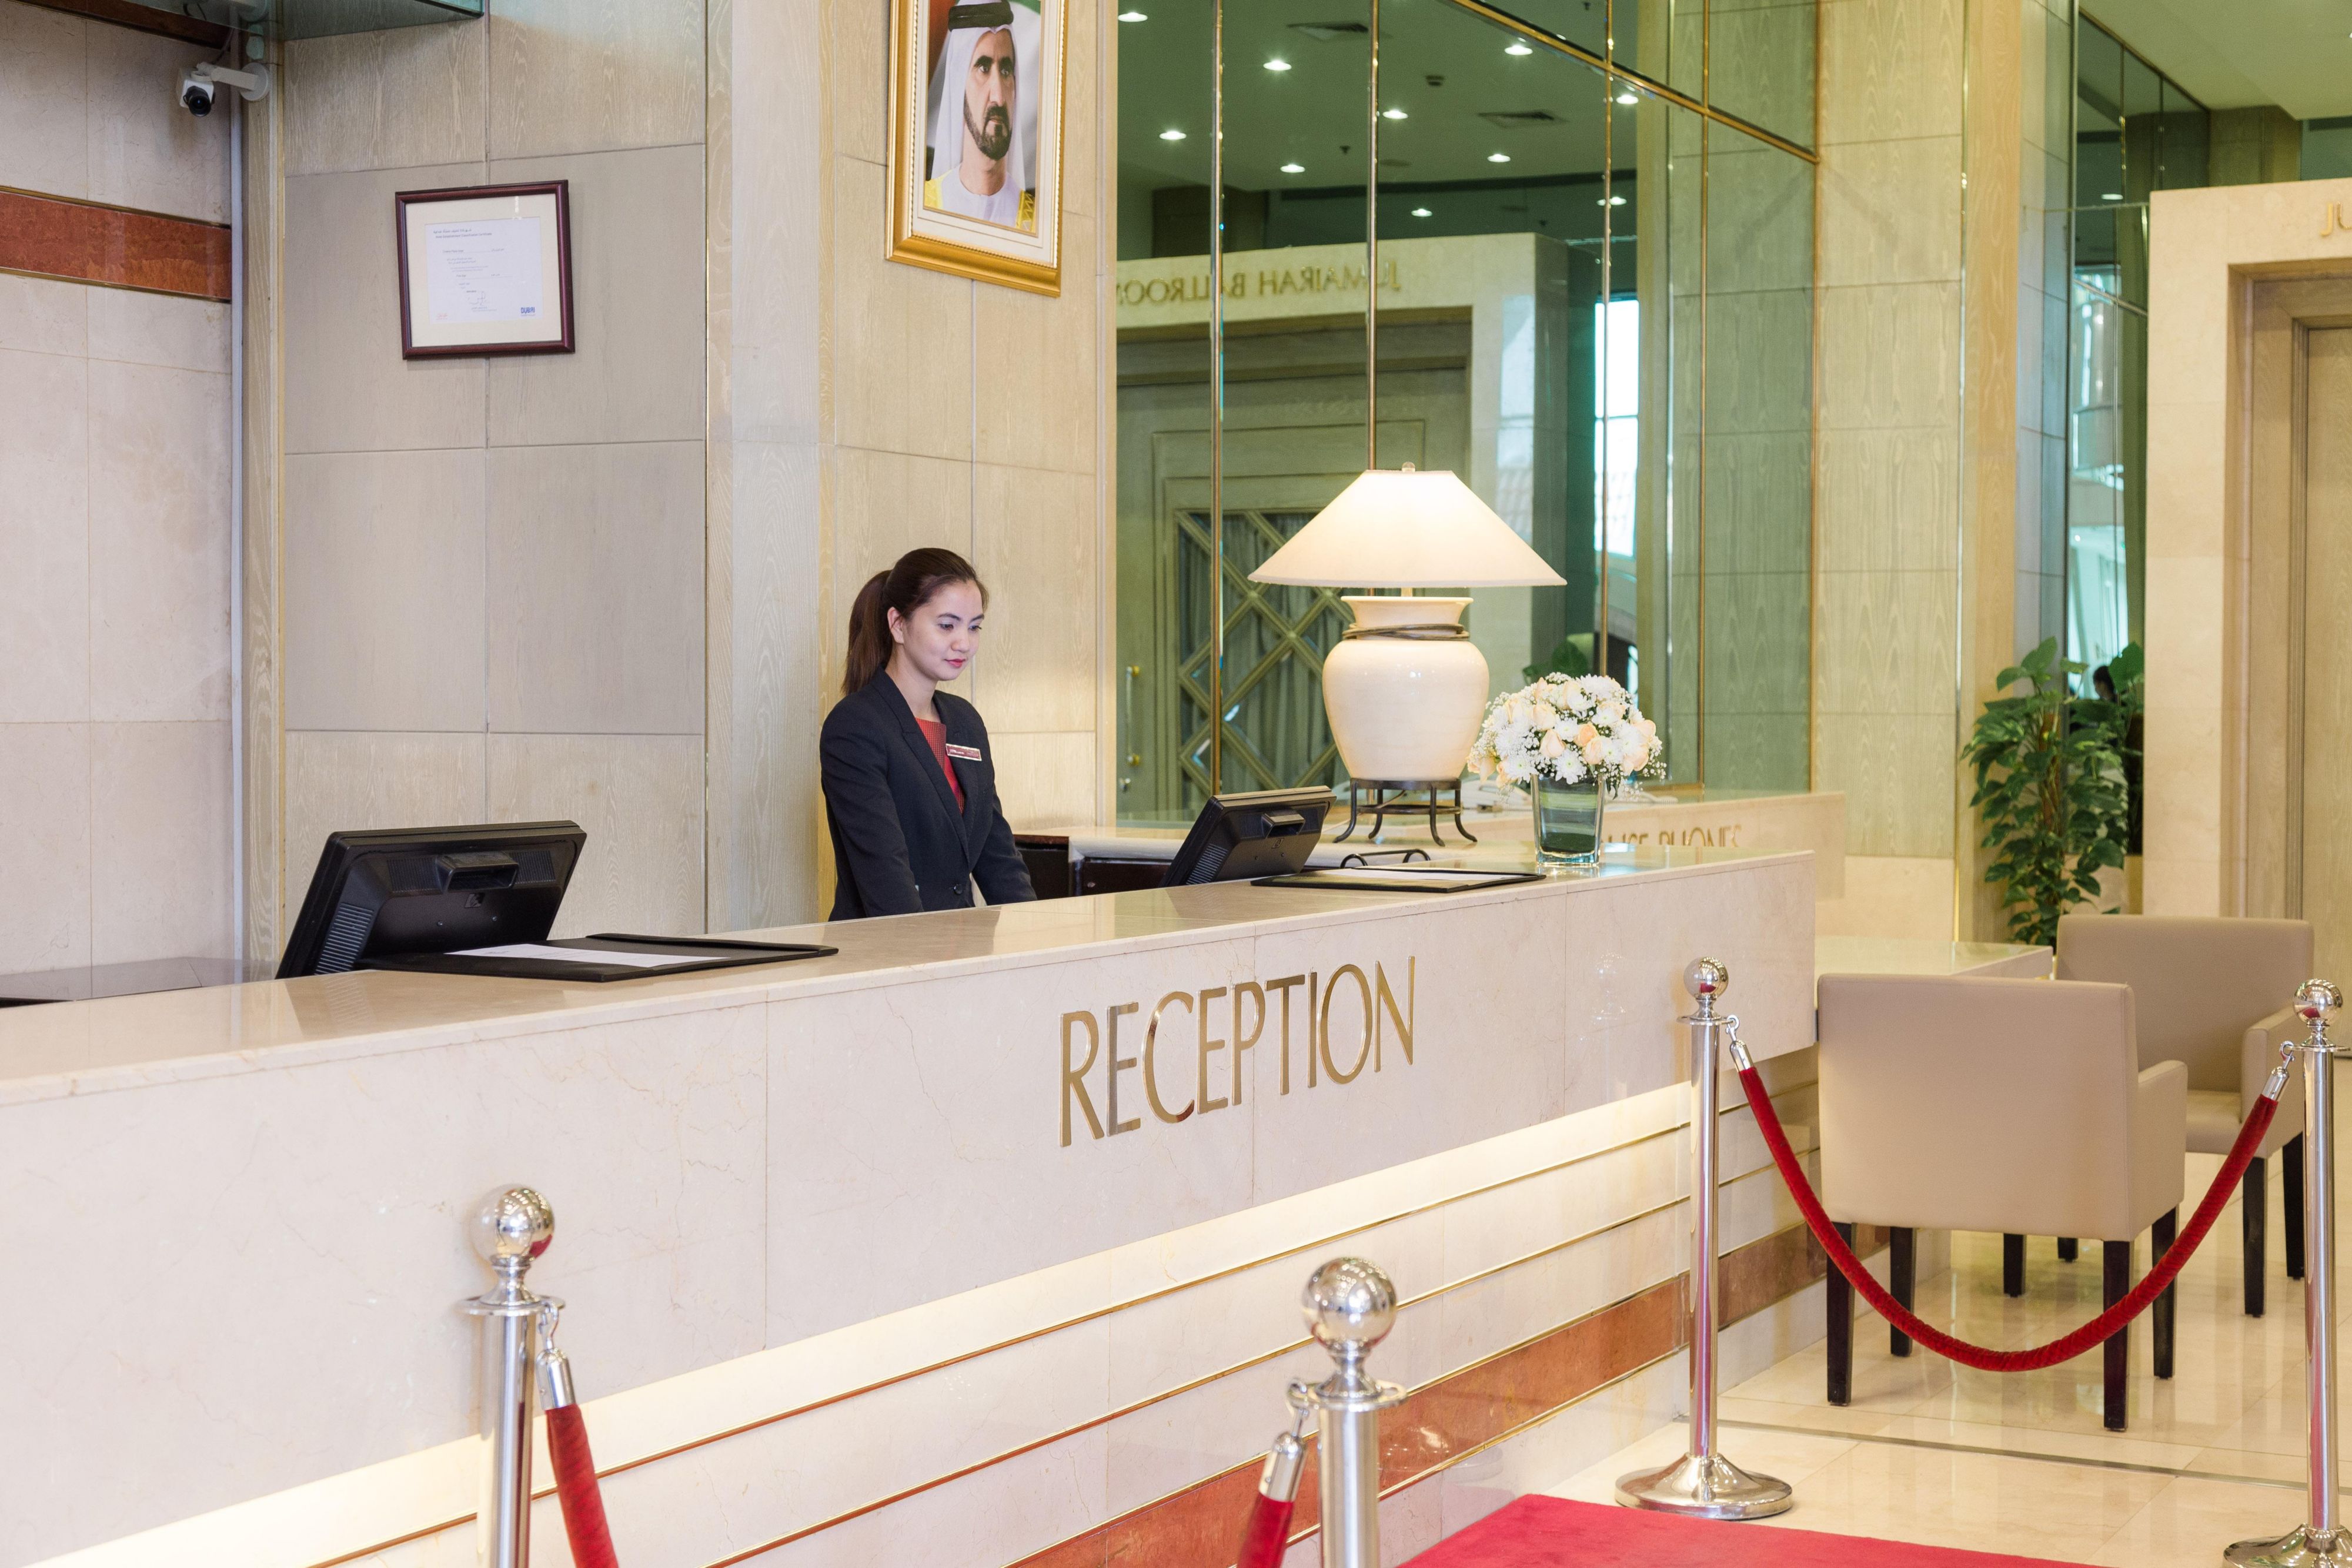 Our friendly front desk colleagues offer a warm welcome